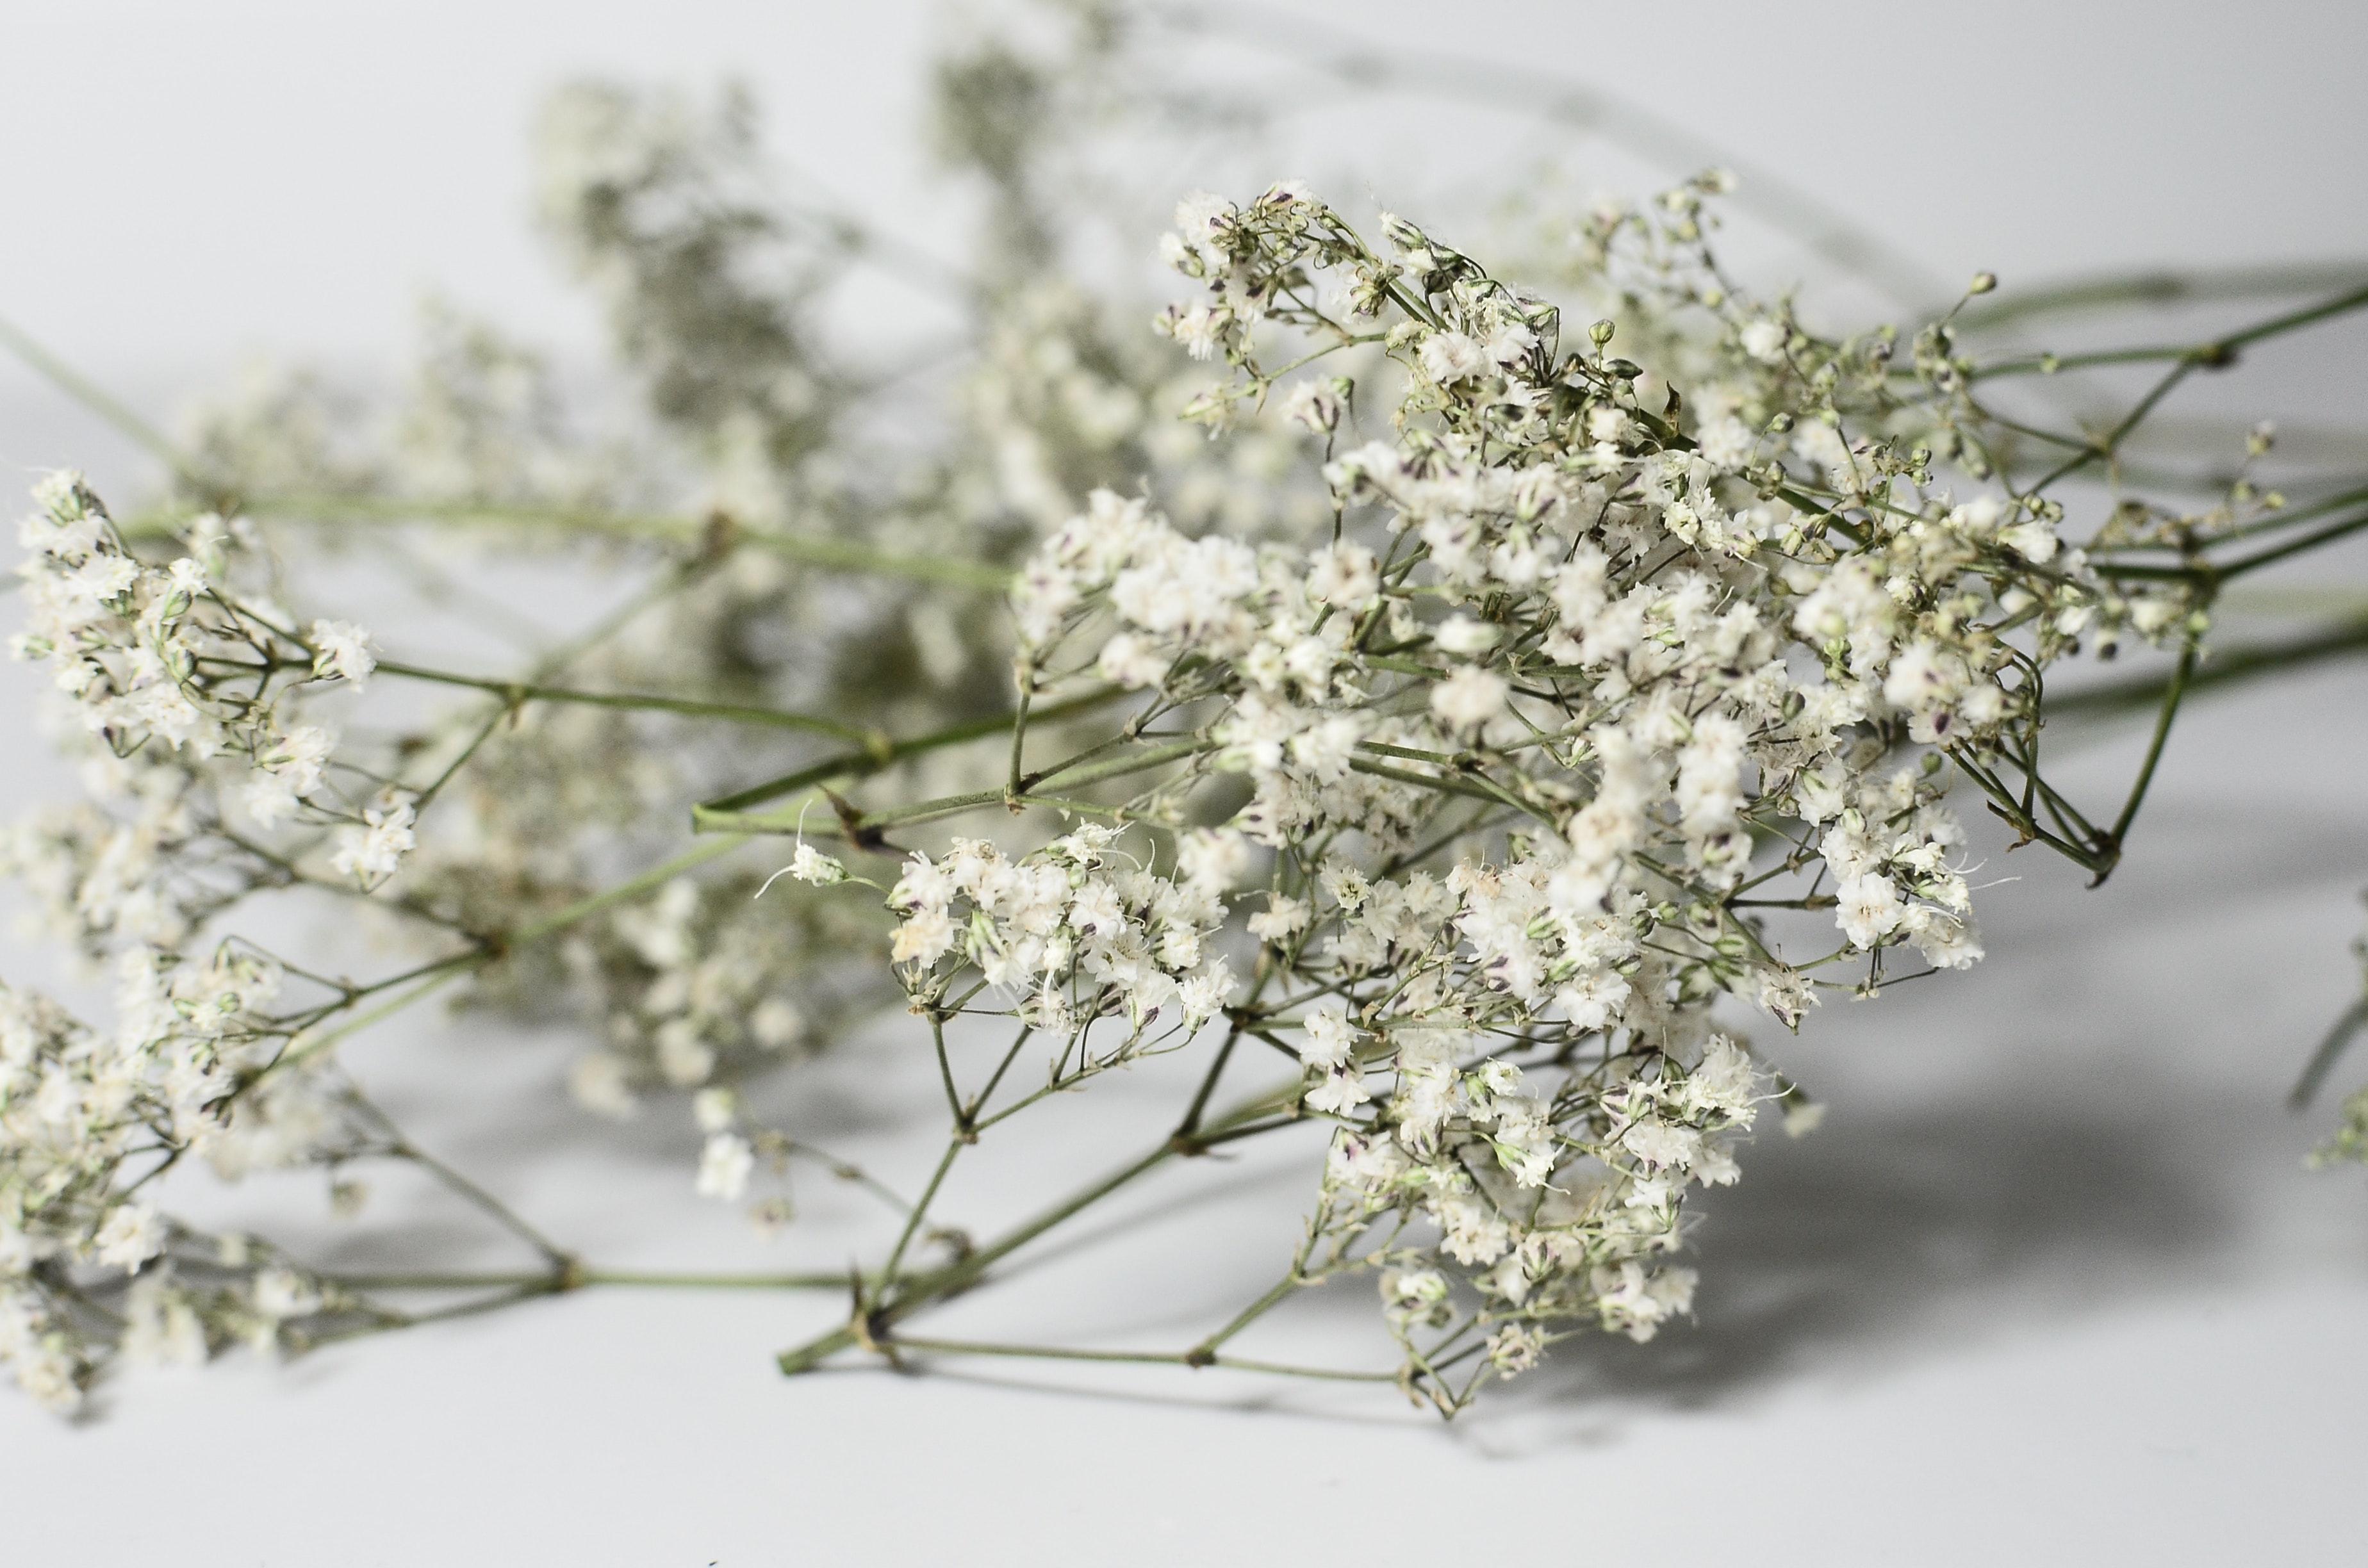 Why does my baby's breath smell sweet? 